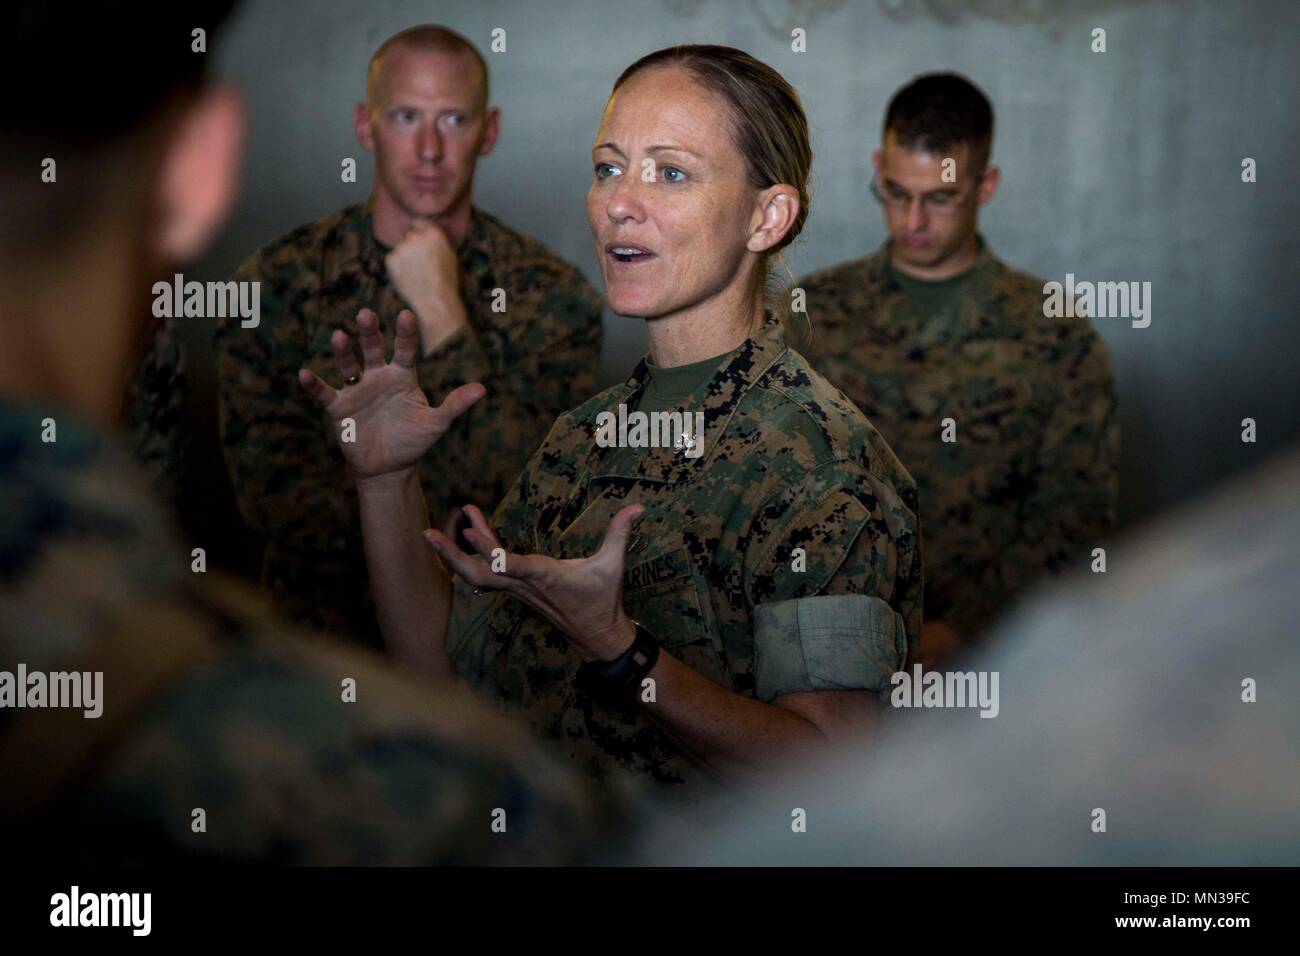 U.S. Marine Corps Col. Maura Hennigan, Commanding Officer for Combat Logistics Regiment-3, talks to Marines attached to Task Force Koa Moana 17 aboard the USNS Sacagawea, off the coast of Australia, Aug. 31, 2017.  Koa Moana 17 is designed to improve interoperability with our partners, enhance military-to-military relations, and expose the Marine Corps forces to different types of terrain for familiarity in the event of a natural disaster in the region.   (U.S. Marine Corps photo by MCIPAC Combat Camera Lance Cpl. Juan C. Bustos) Stock Photo